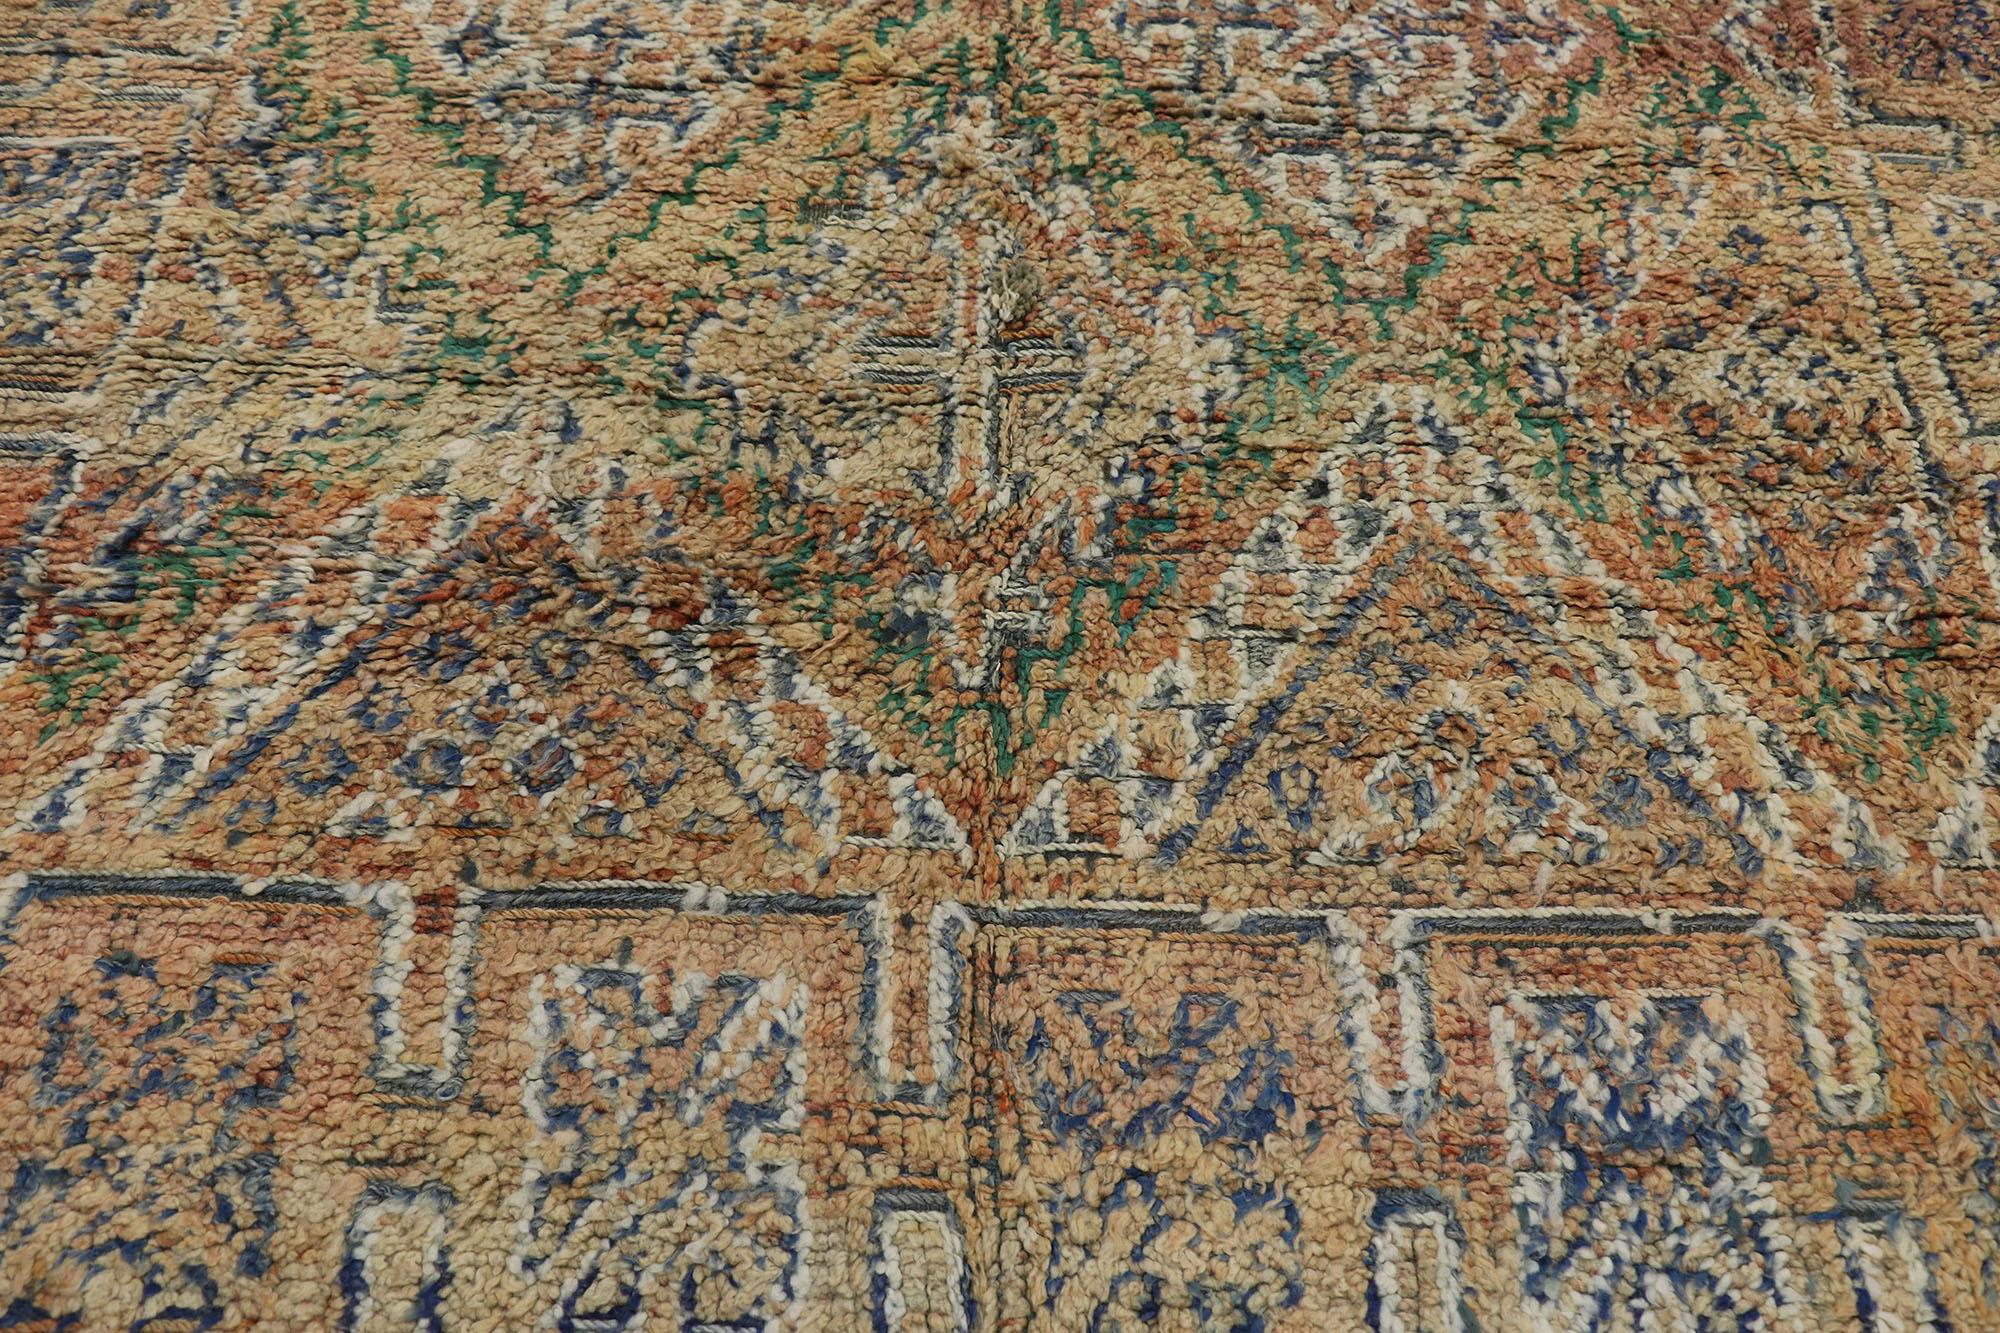 Vintage Beni MGuild Moroccan Rug, Nomadic Charm Meets Rustic Elegance In Good Condition For Sale In Dallas, TX